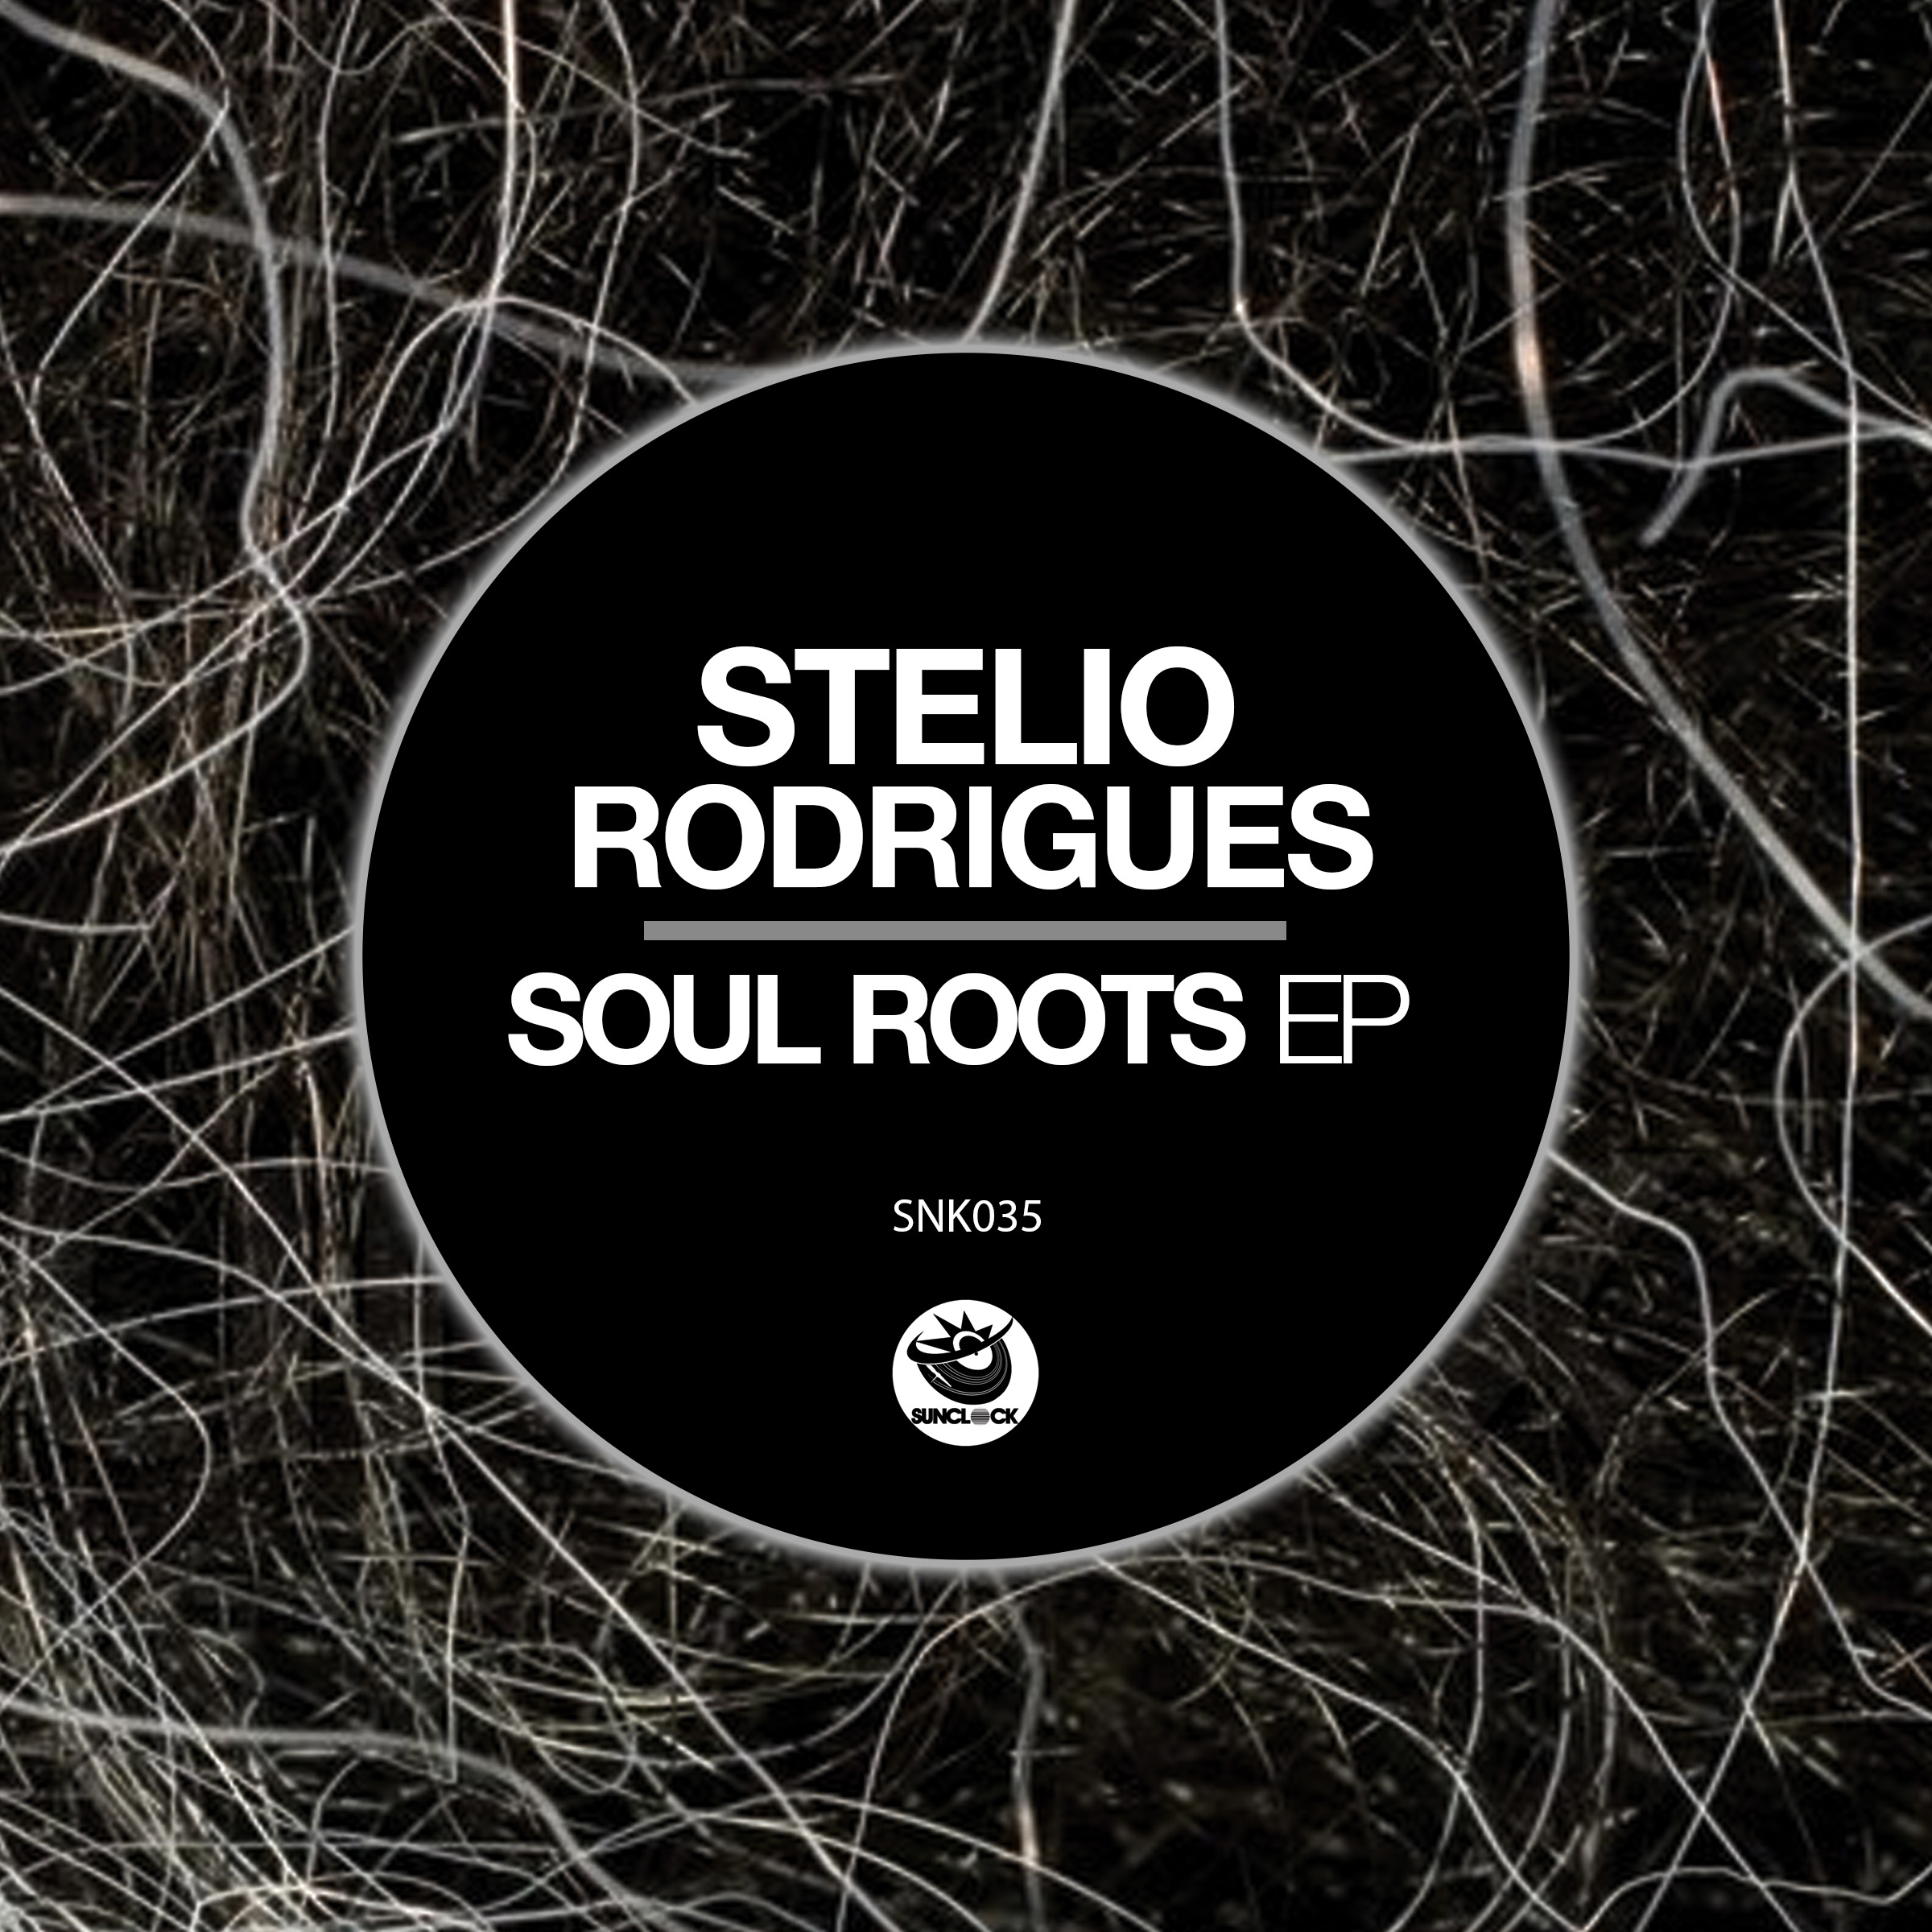 Stelio Rodrigues - Soul Roots Ep - SNK035 Cover